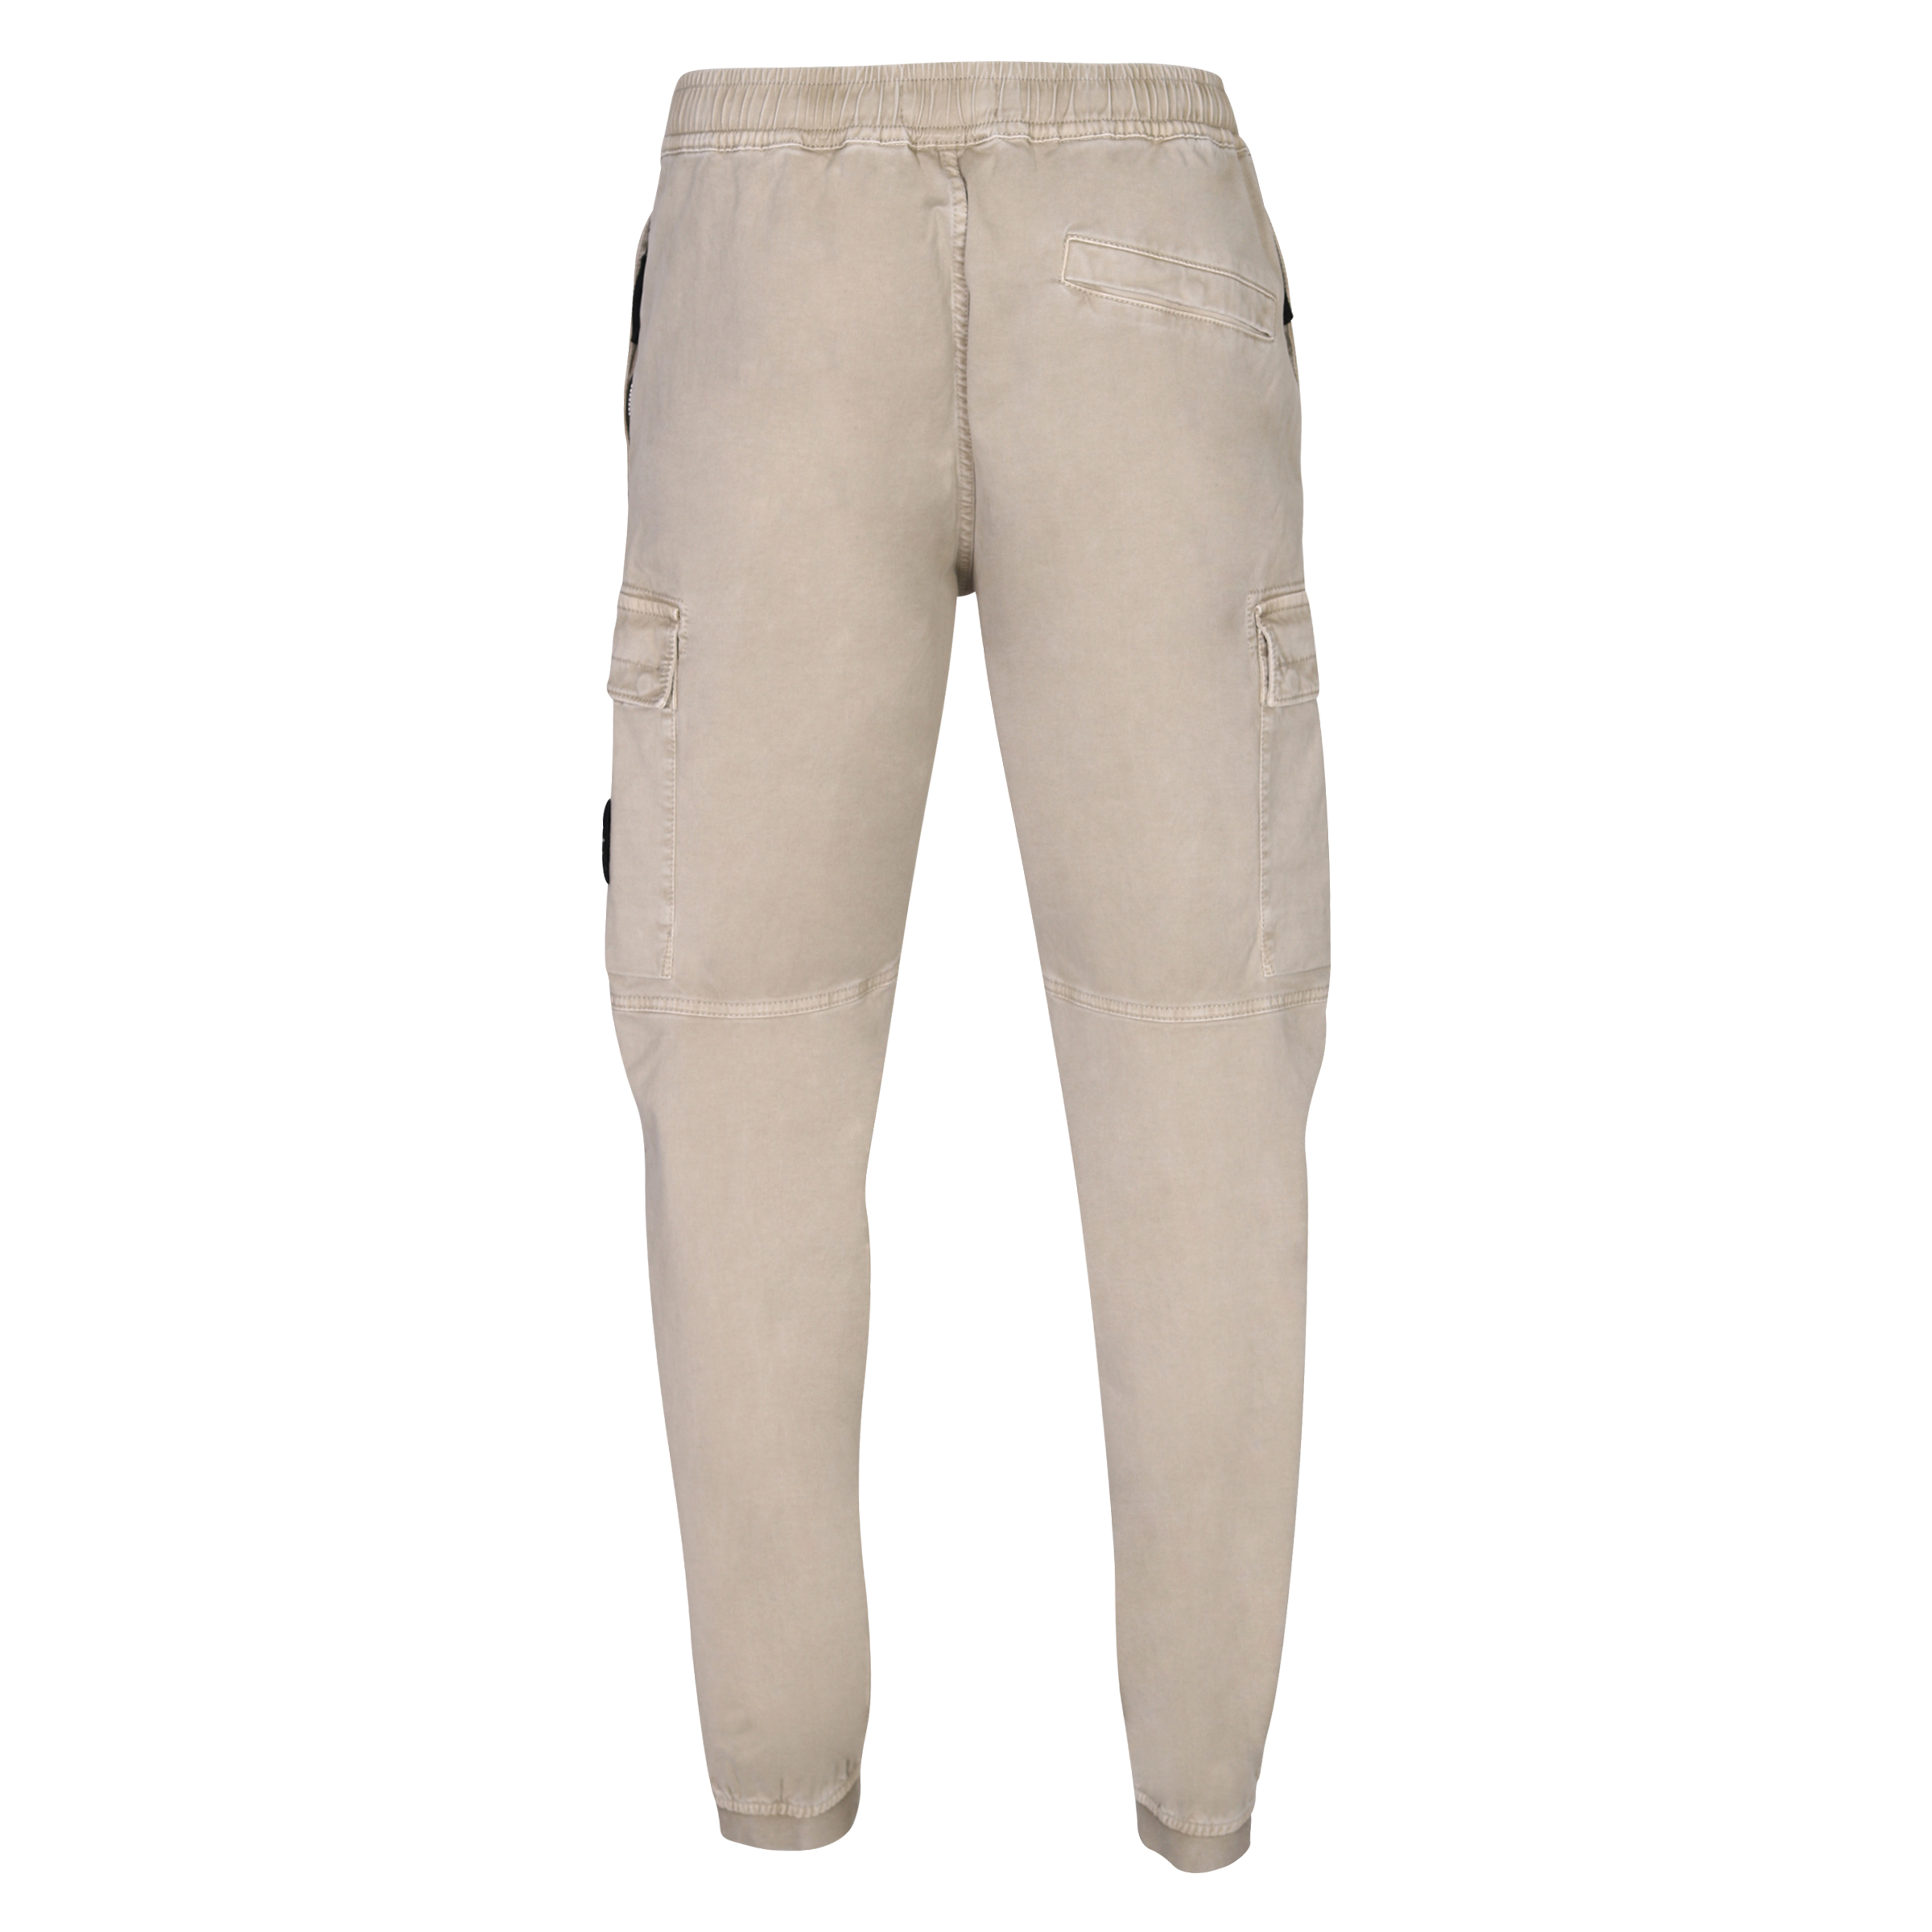 Stone Island Cargo Pant in Washed Beige 31